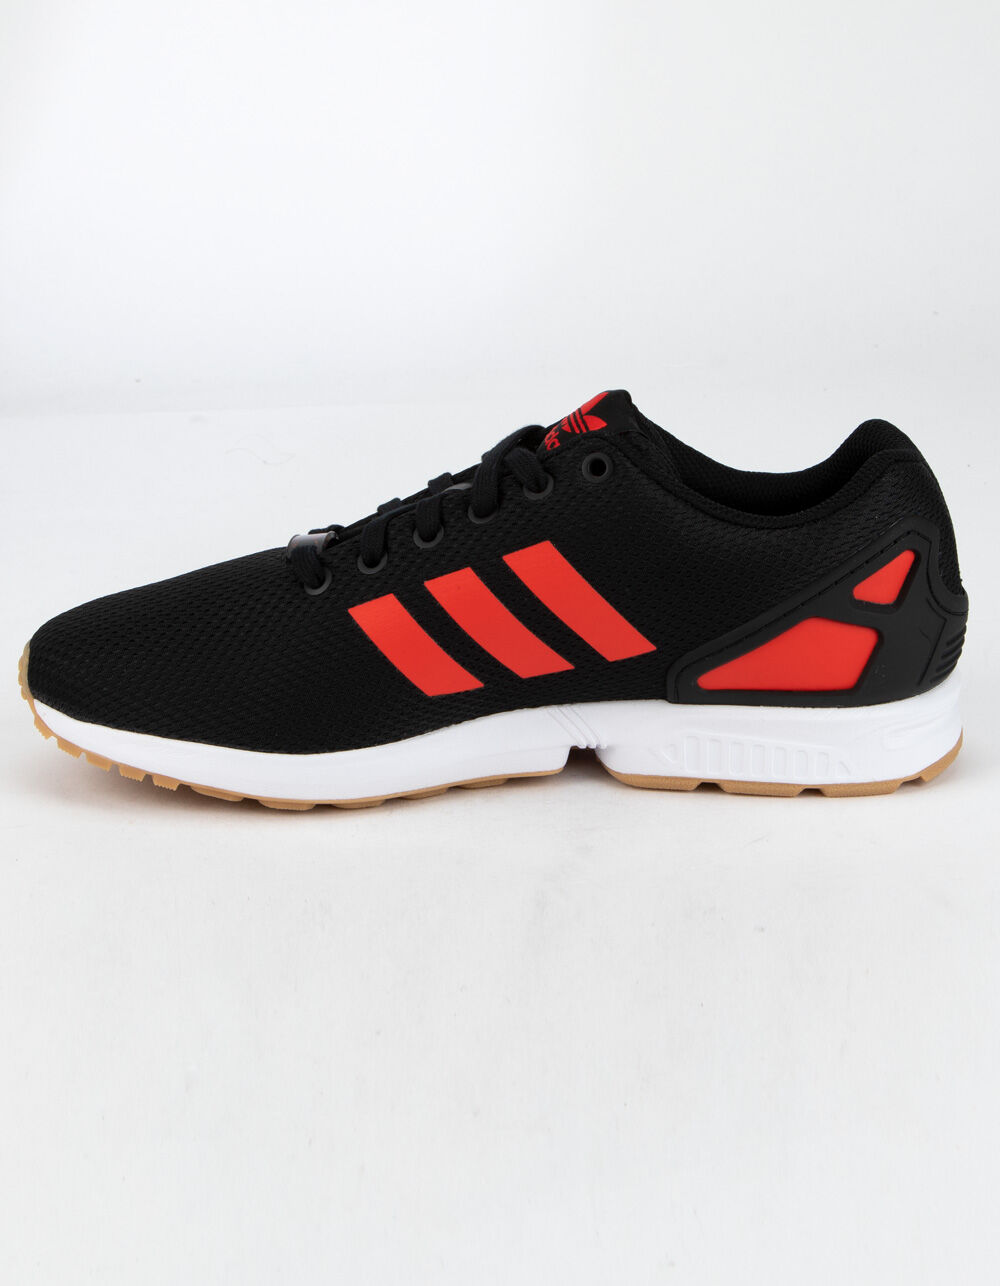 ADIDAS ZX Flux Black & Red Shoes image number 3